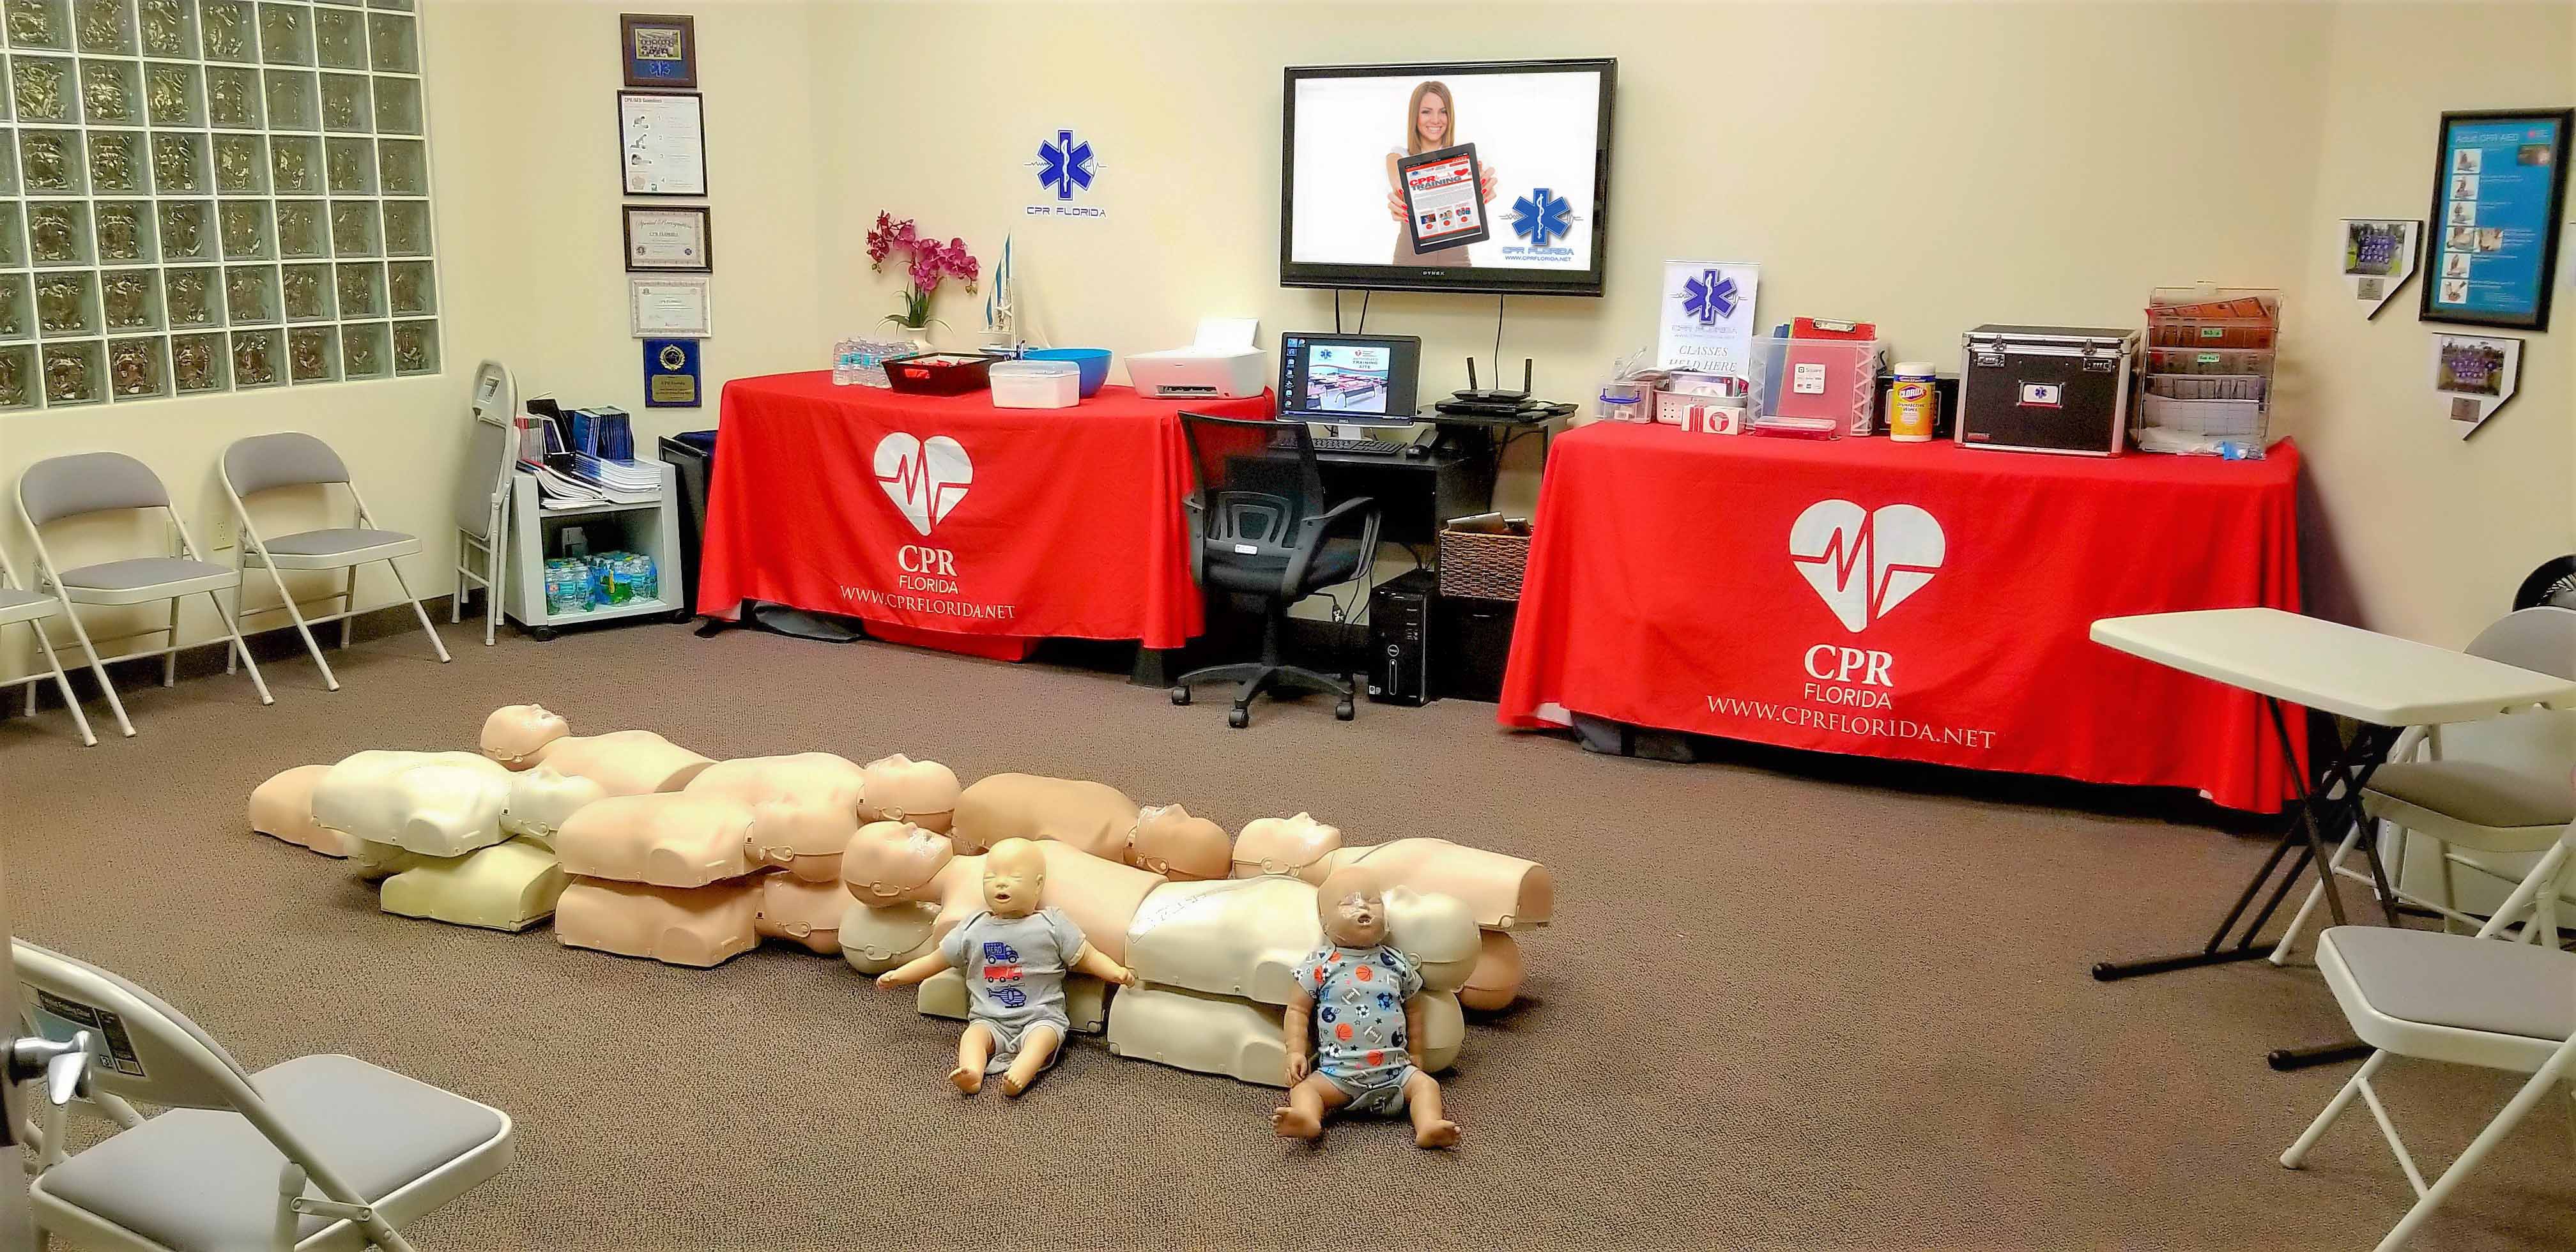 West Palm Beach cpr bls classes certification acls pals first aid training